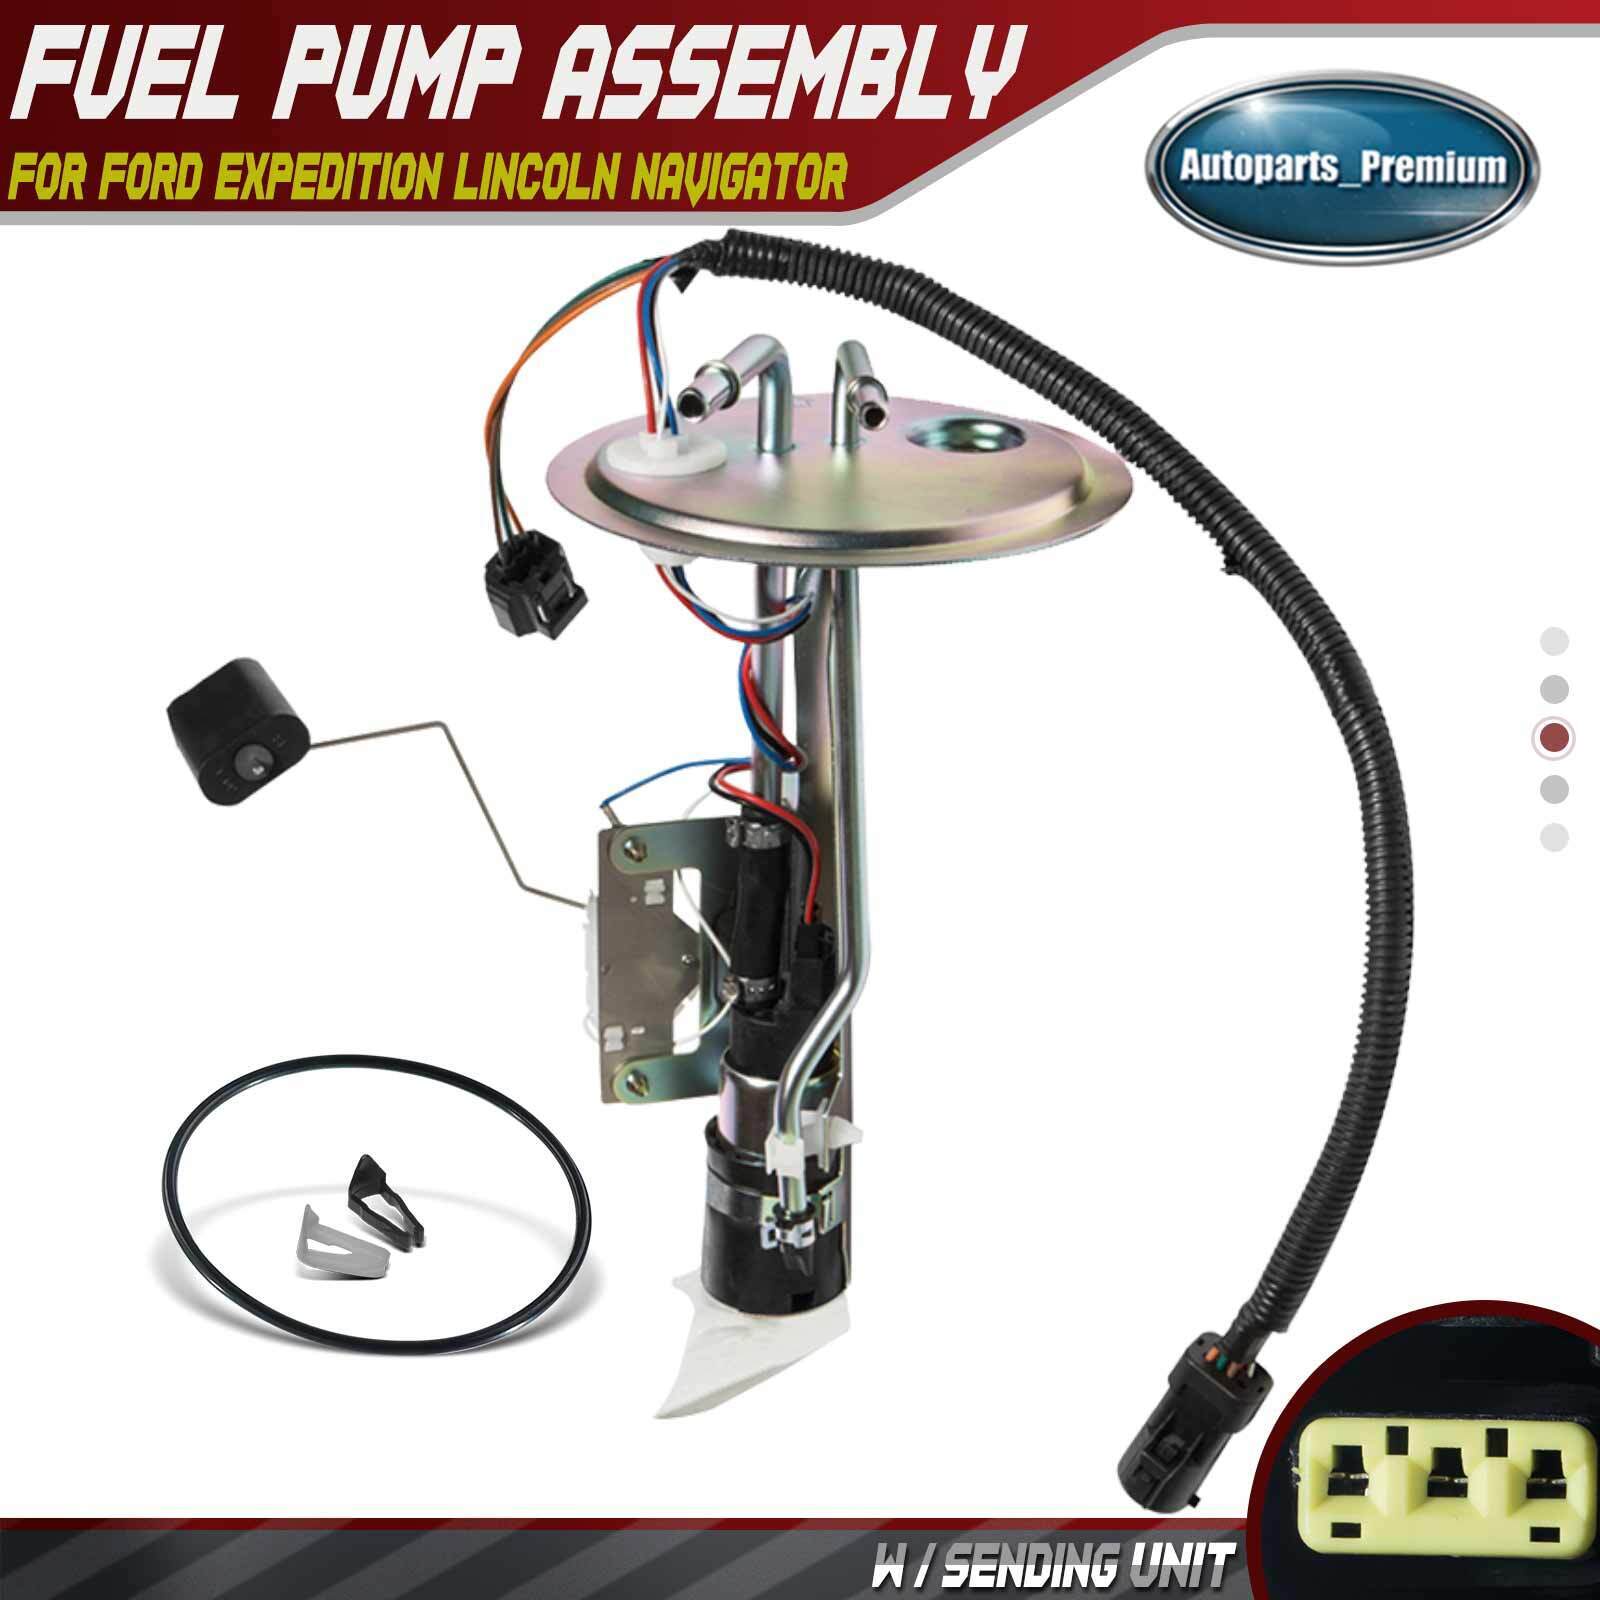 Fuel Pump Sender Assembly for Ford Expedition Lincoln Navigator 1997-1998 E2201S